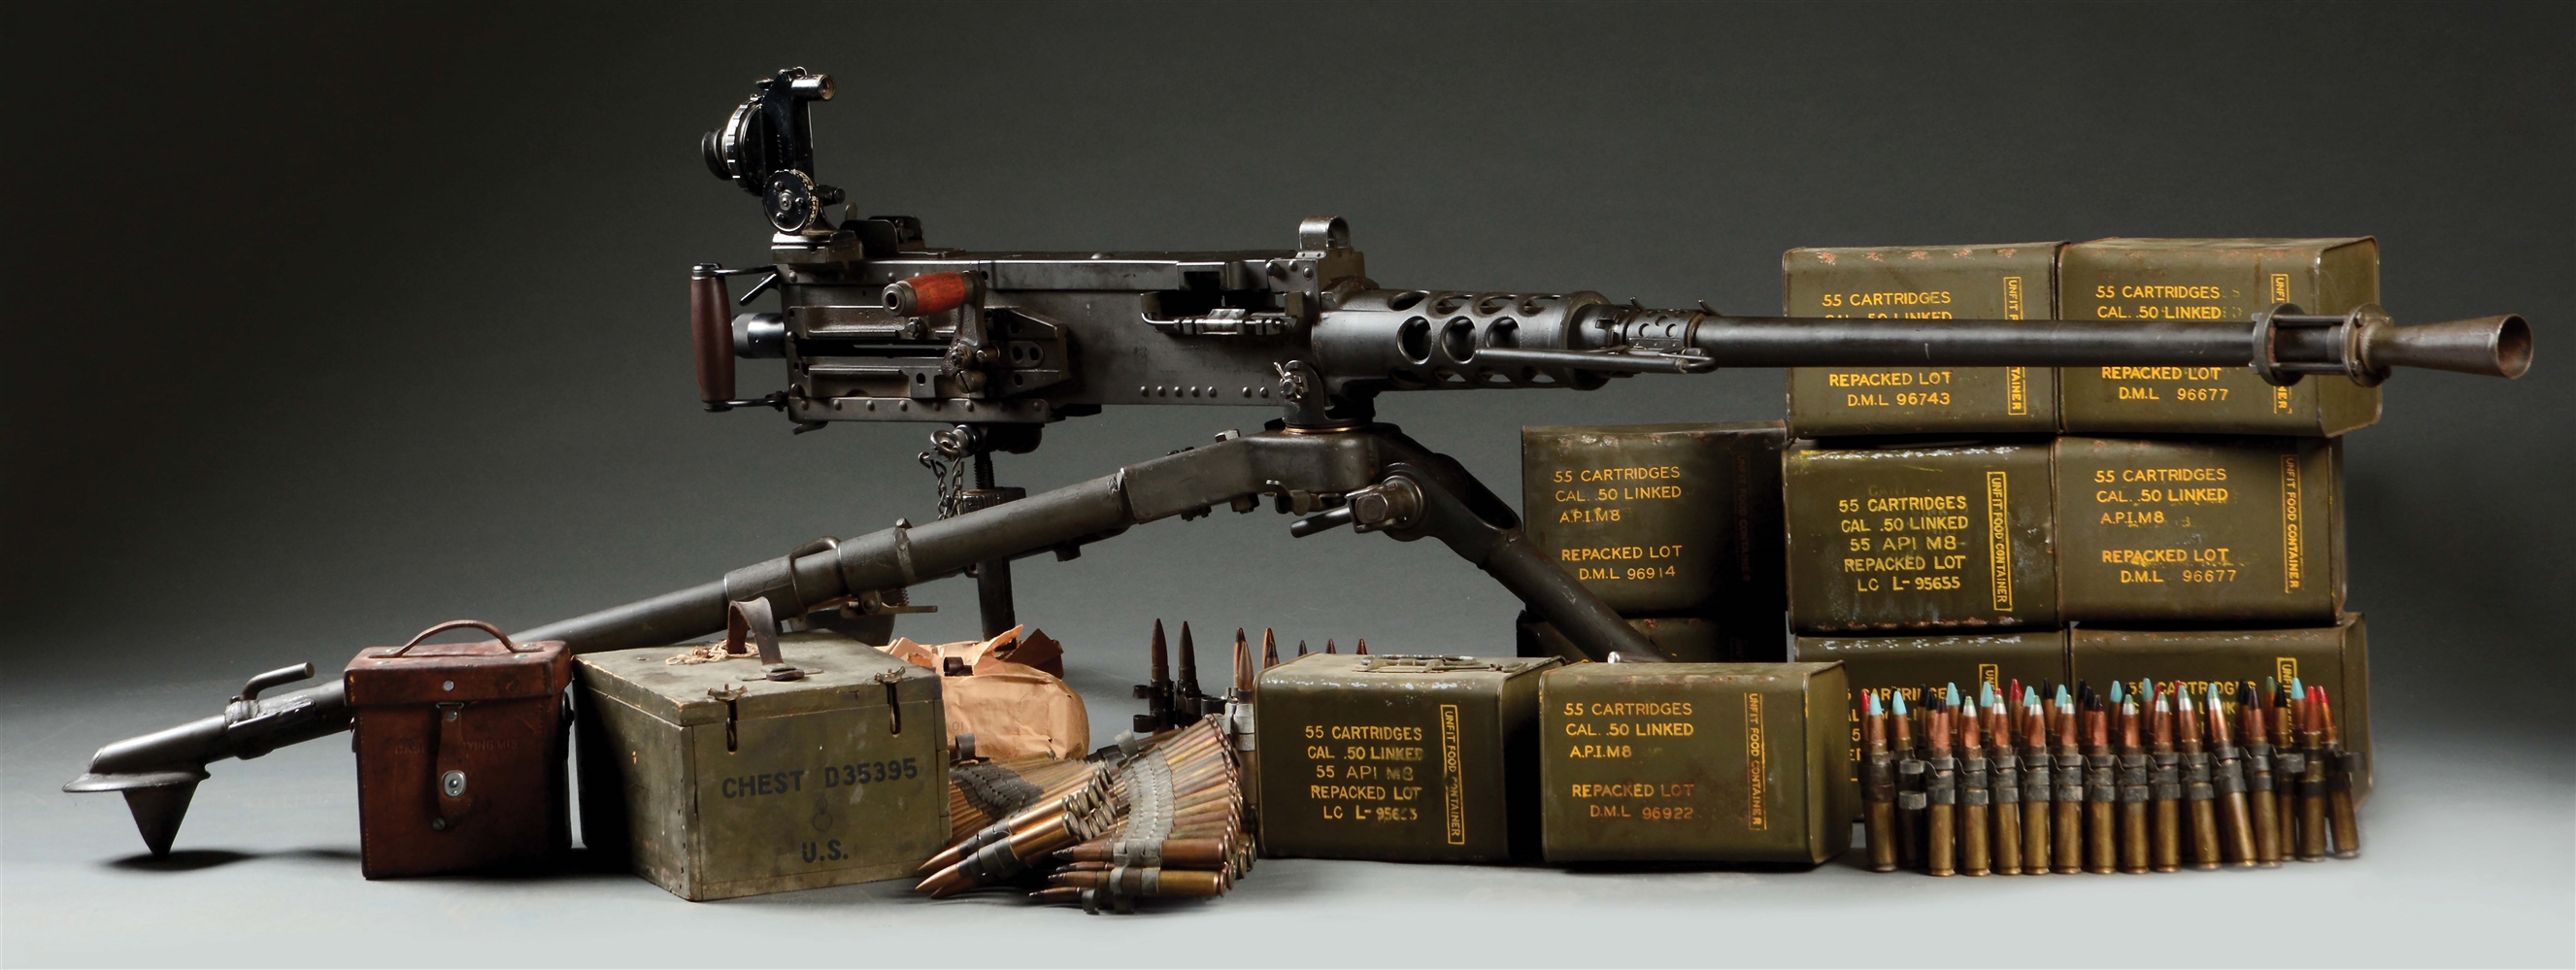 (N) WELL ACCESSORIZED AND HIGHLY COLLECTIBLE WORLD WAR II SAVAGE ARMS CORPORATION U.S. M2 HEAVY BARRELED .50 BMG MACHINE GUN (CURIO AND RELIC).